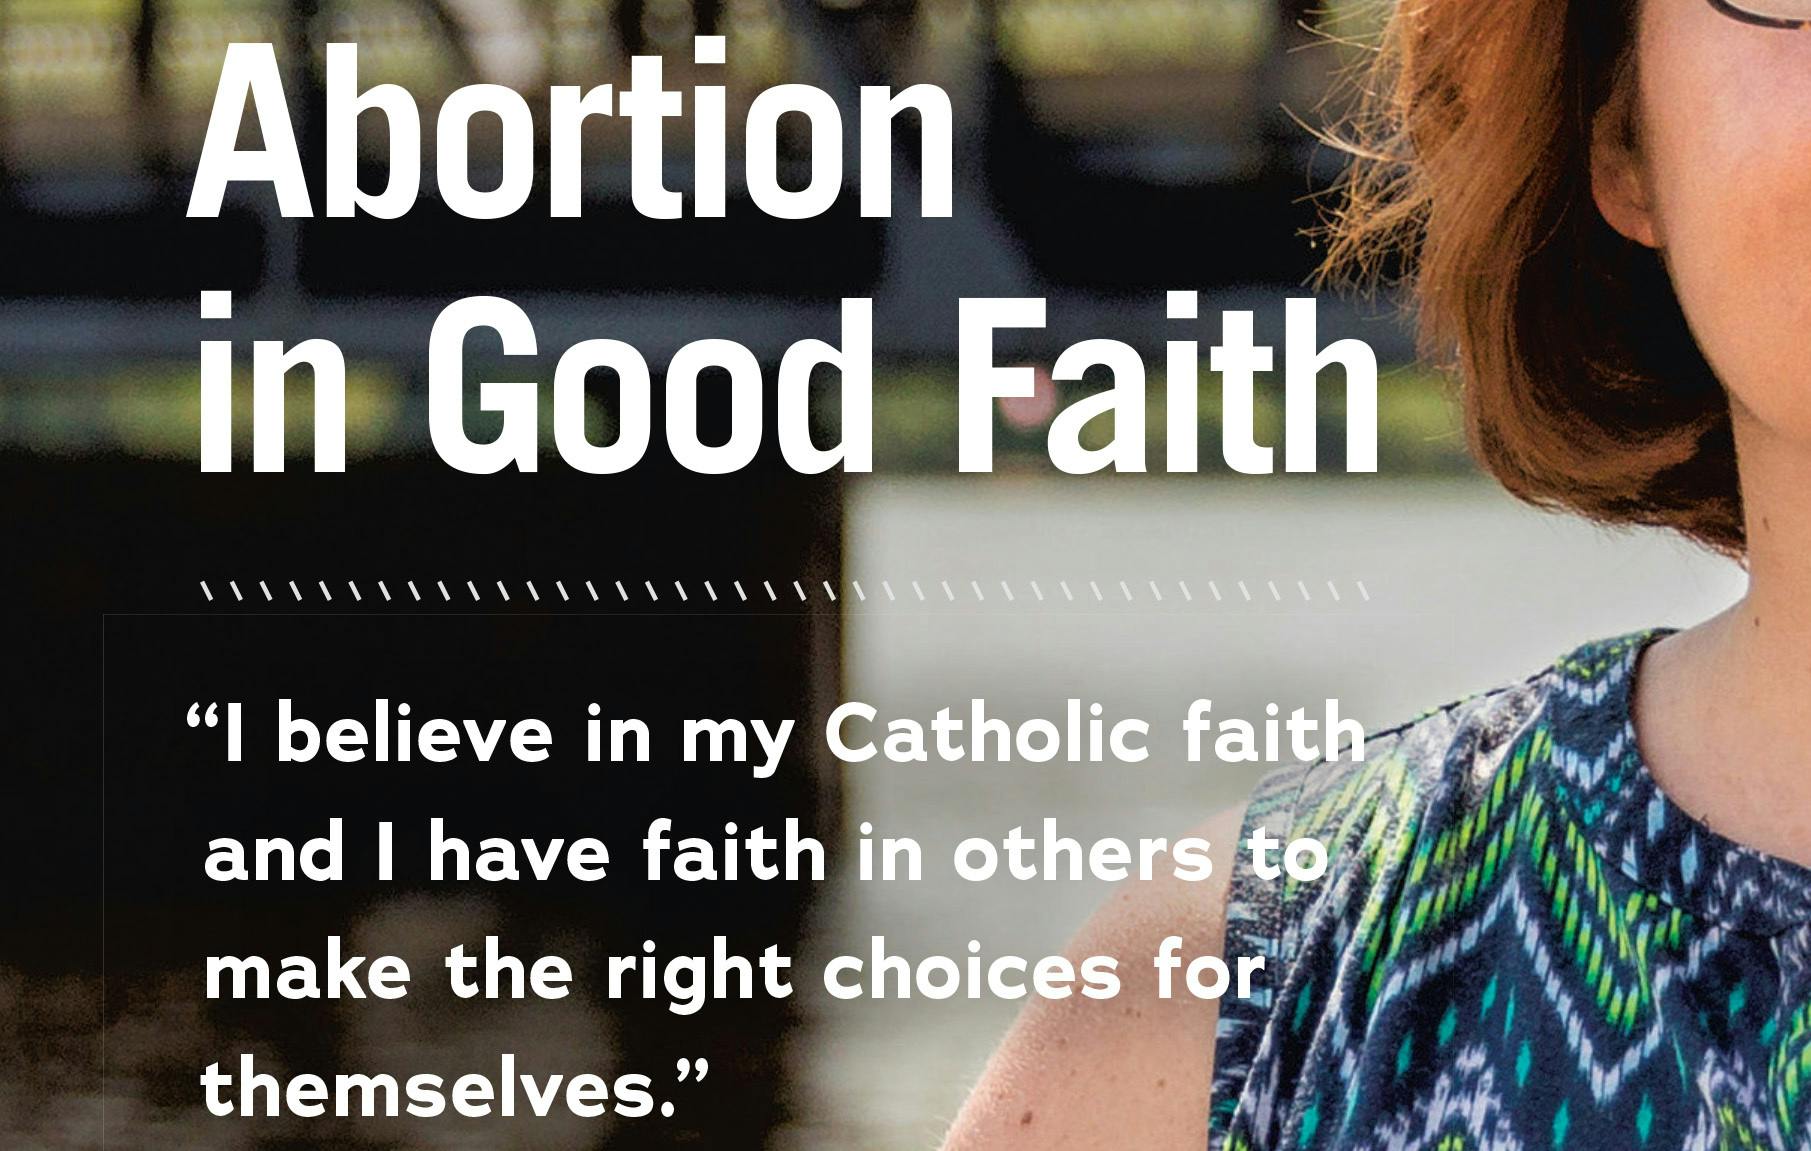 Counterpoint: Ad from Catholics for Choice is full of egregious falsehoods